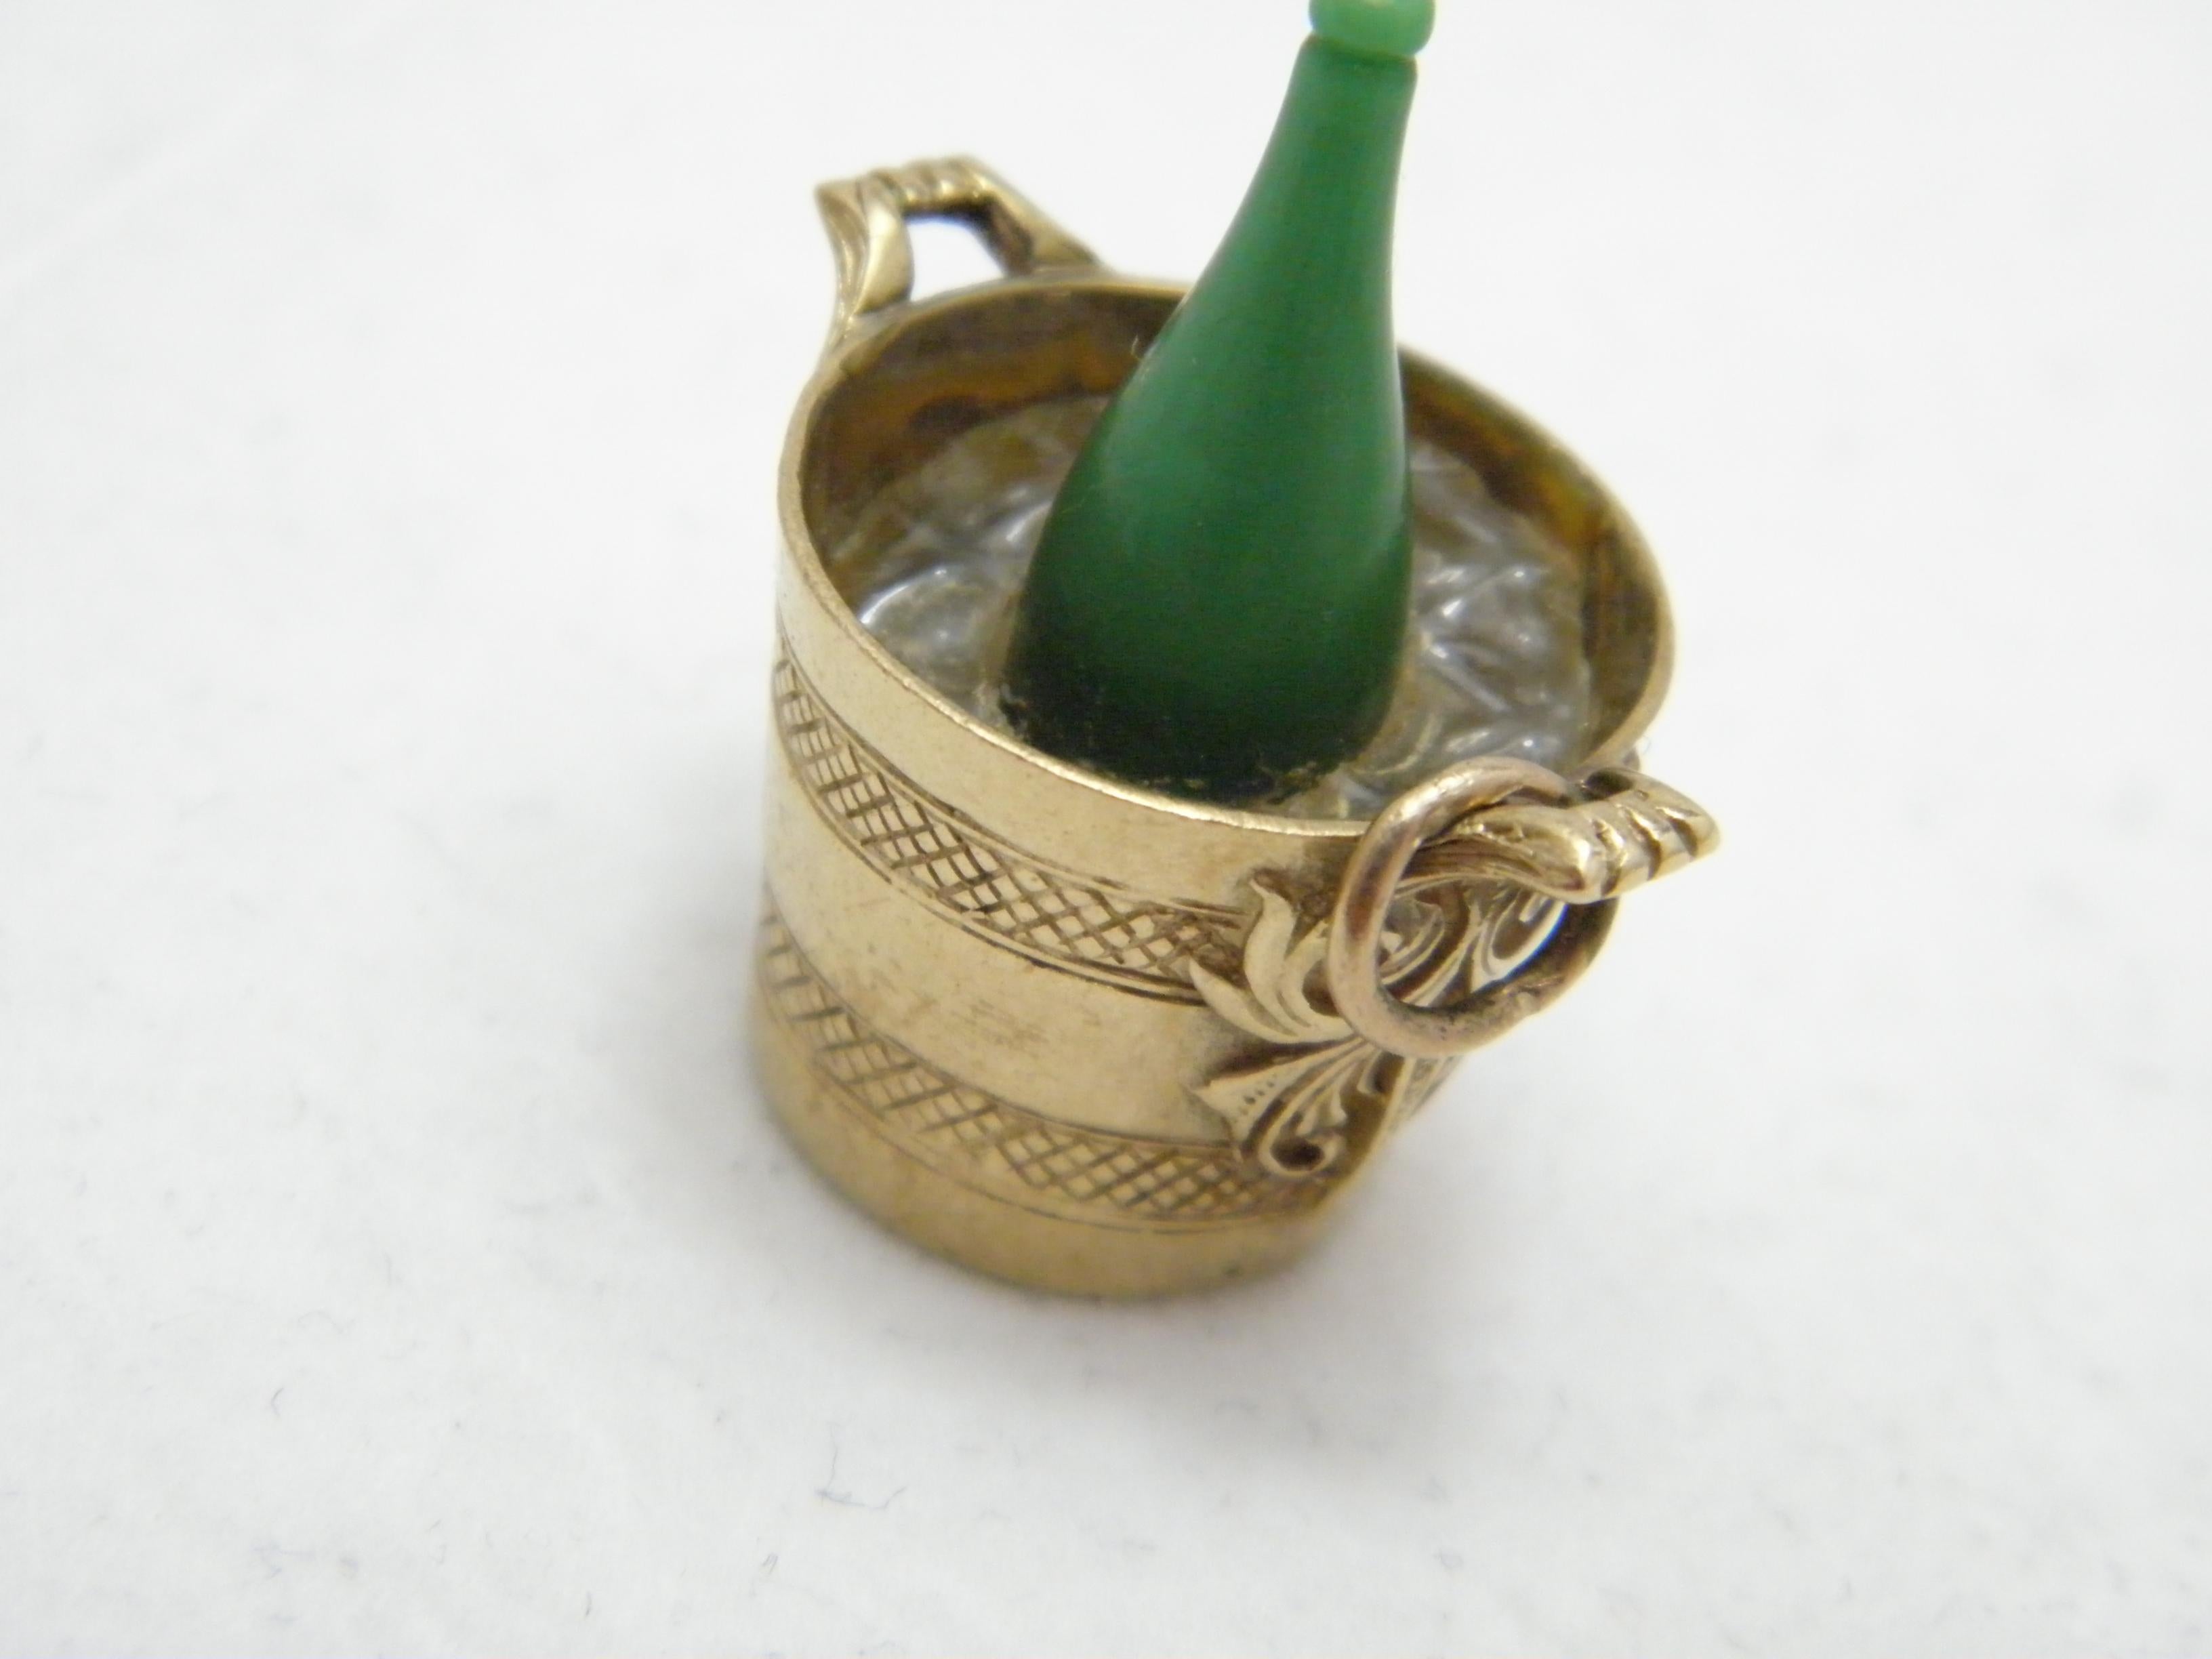 Contemporary Antique 9ct Gold Huge Champagne Bucket Pendant Charm Fob 375 Purity 8.6g 1966 For Sale